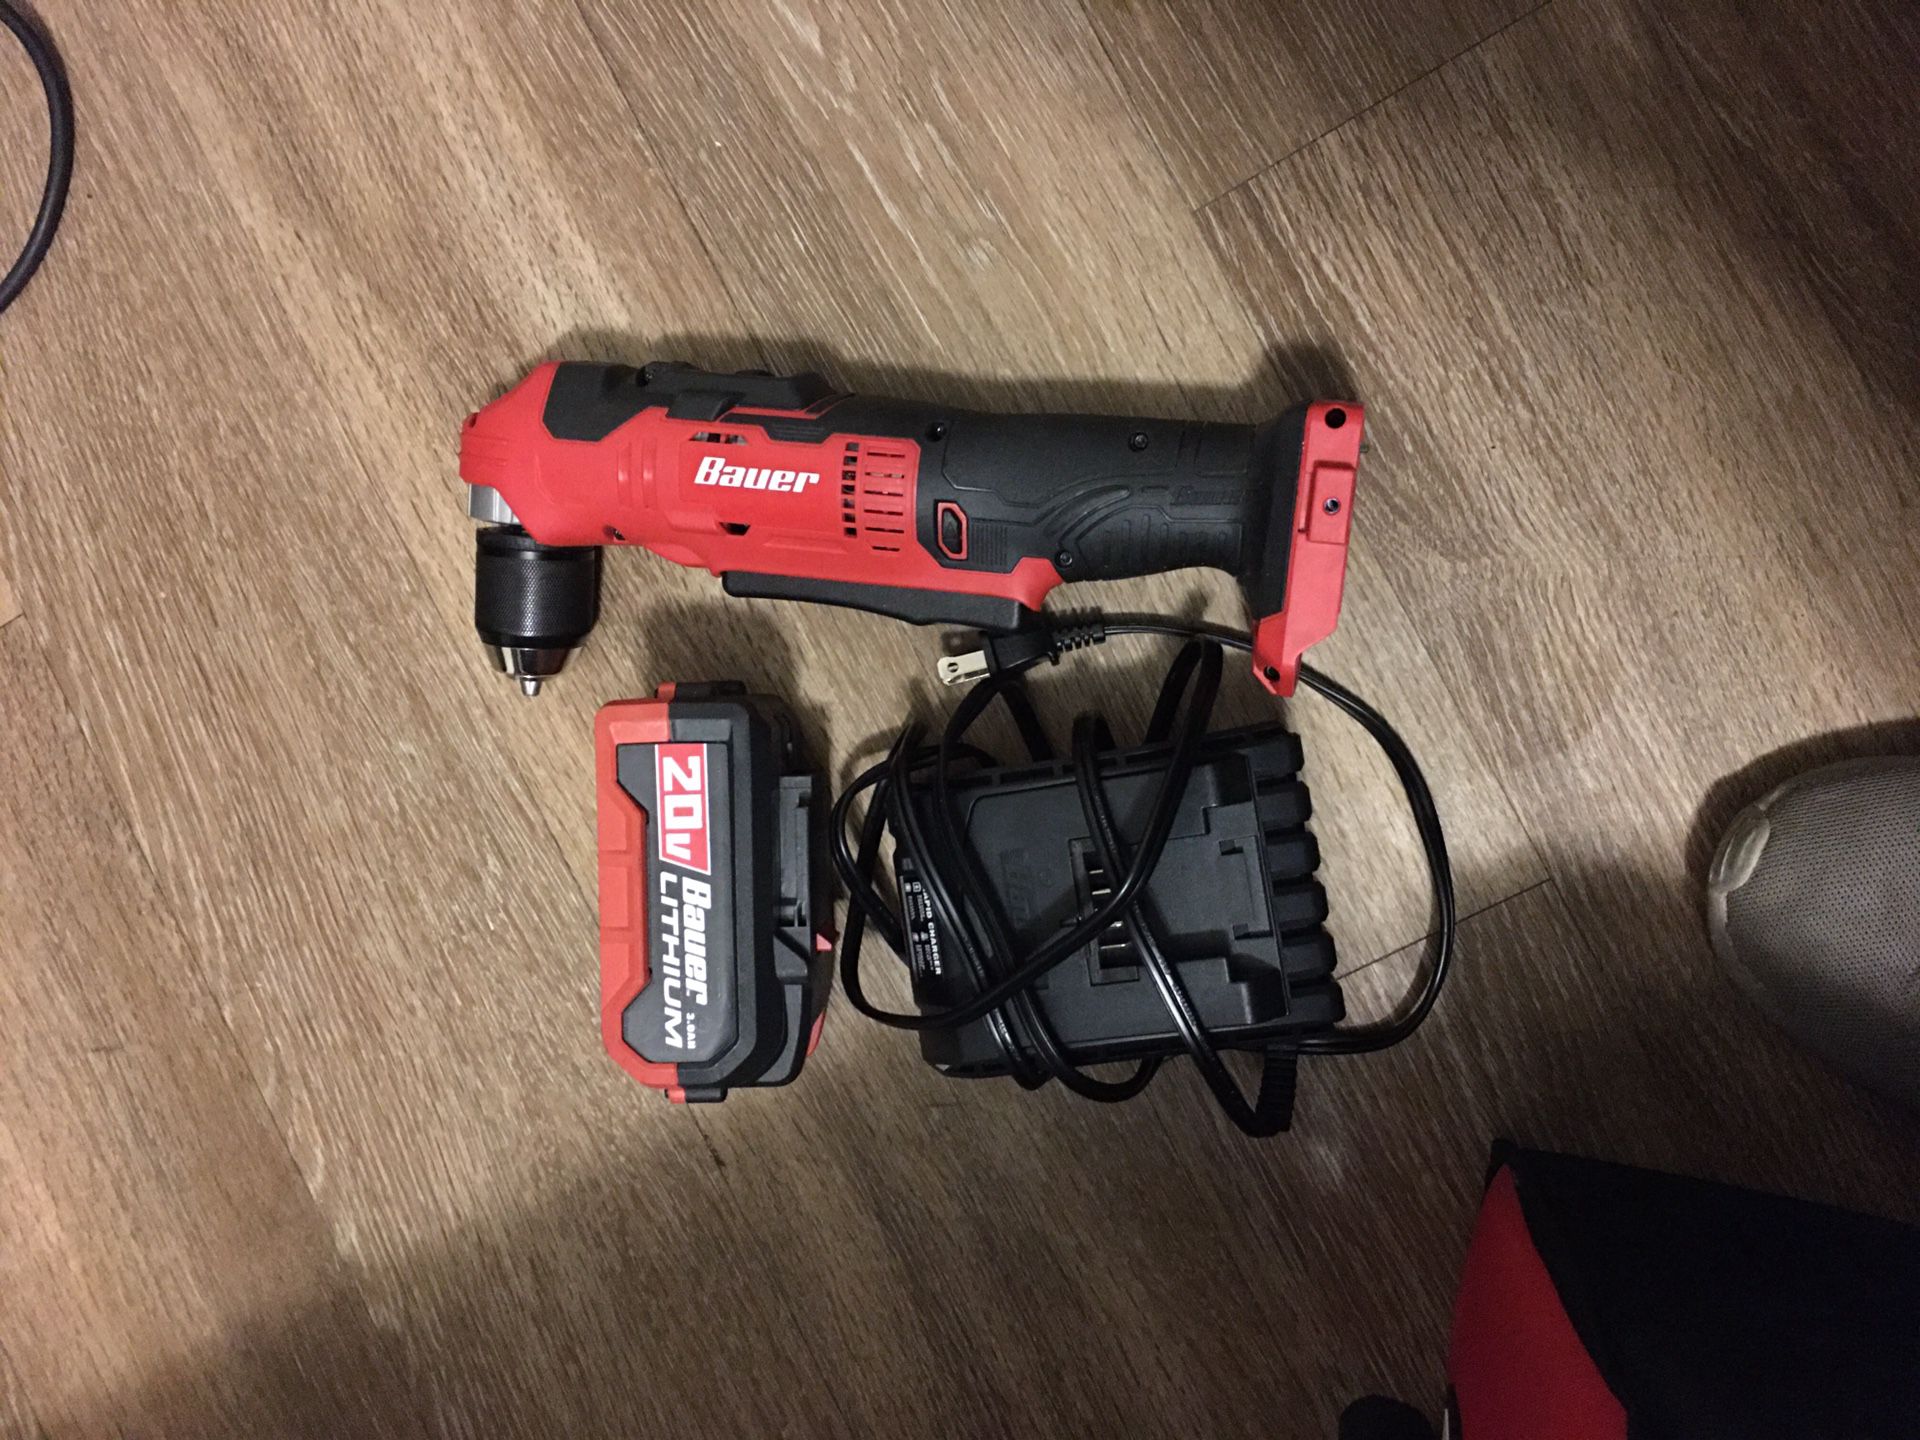 Bauer right angle drill with battery and charger